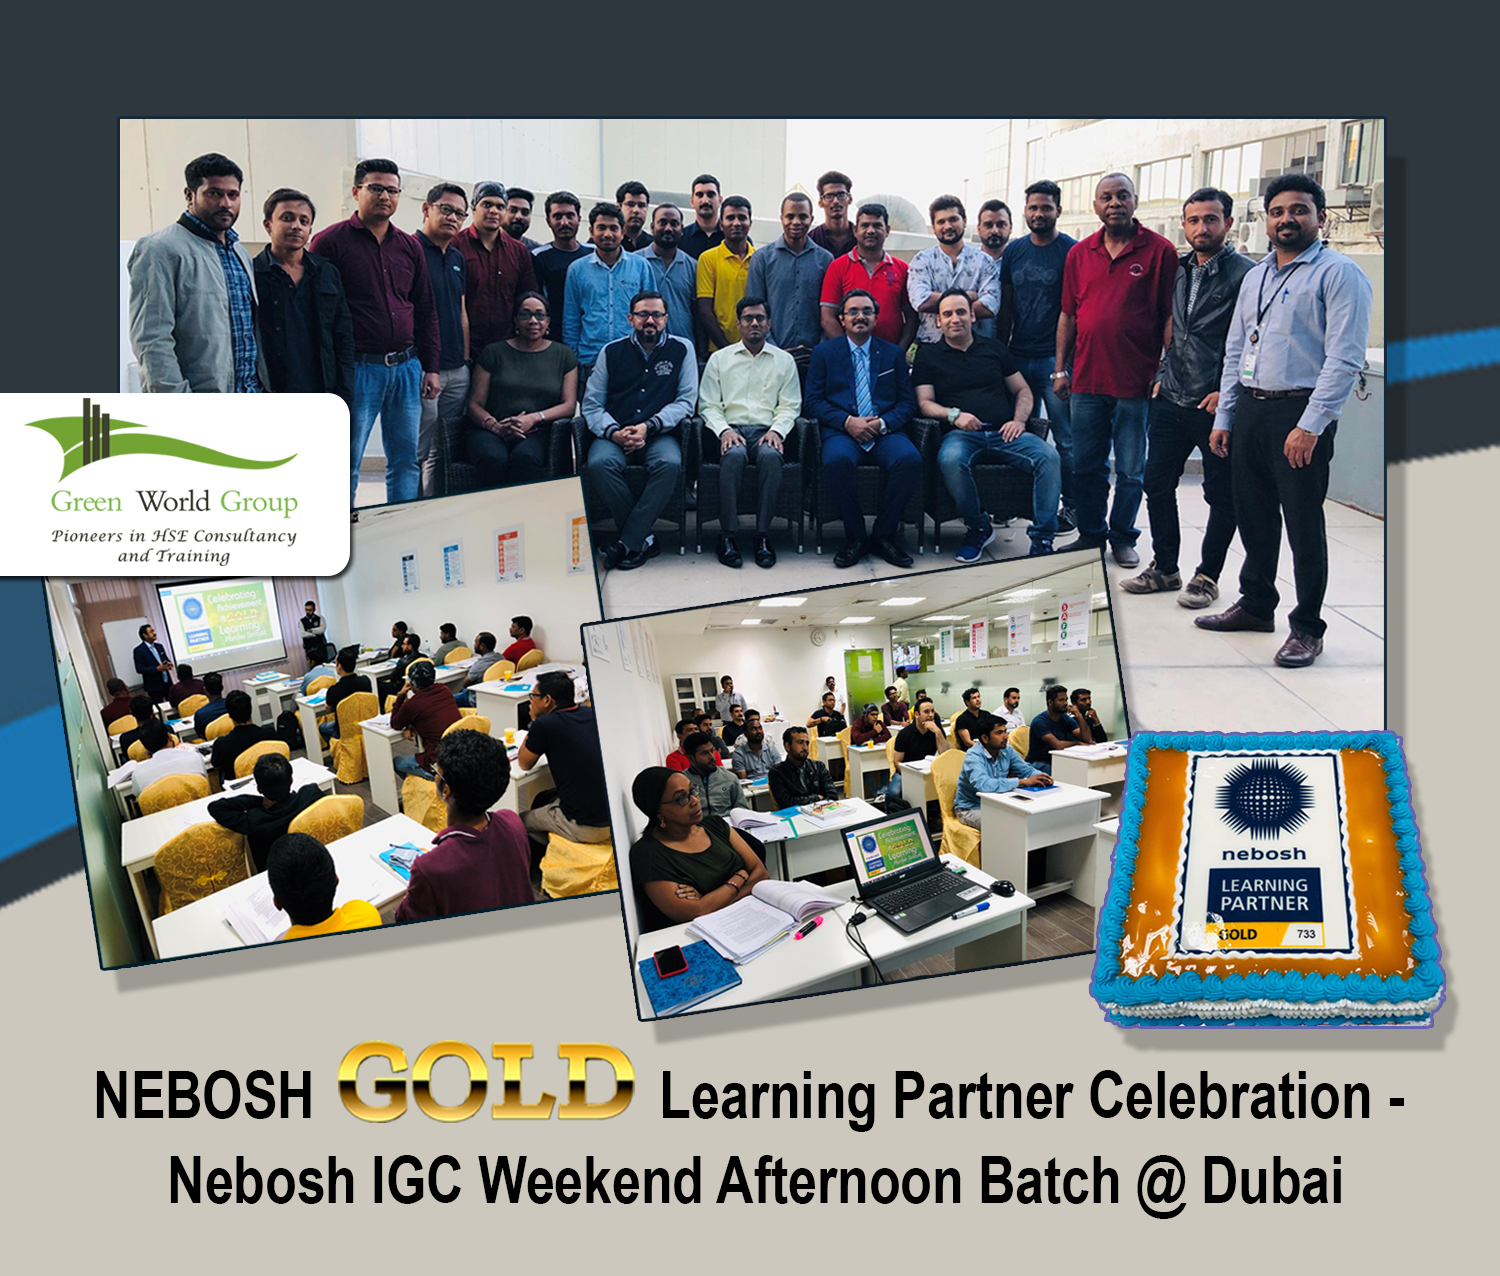 You are currently viewing NEBOSH GOLD Learning Partner Celebration in Dubai – Weekend Afternoon Batch – 3rd January 2020